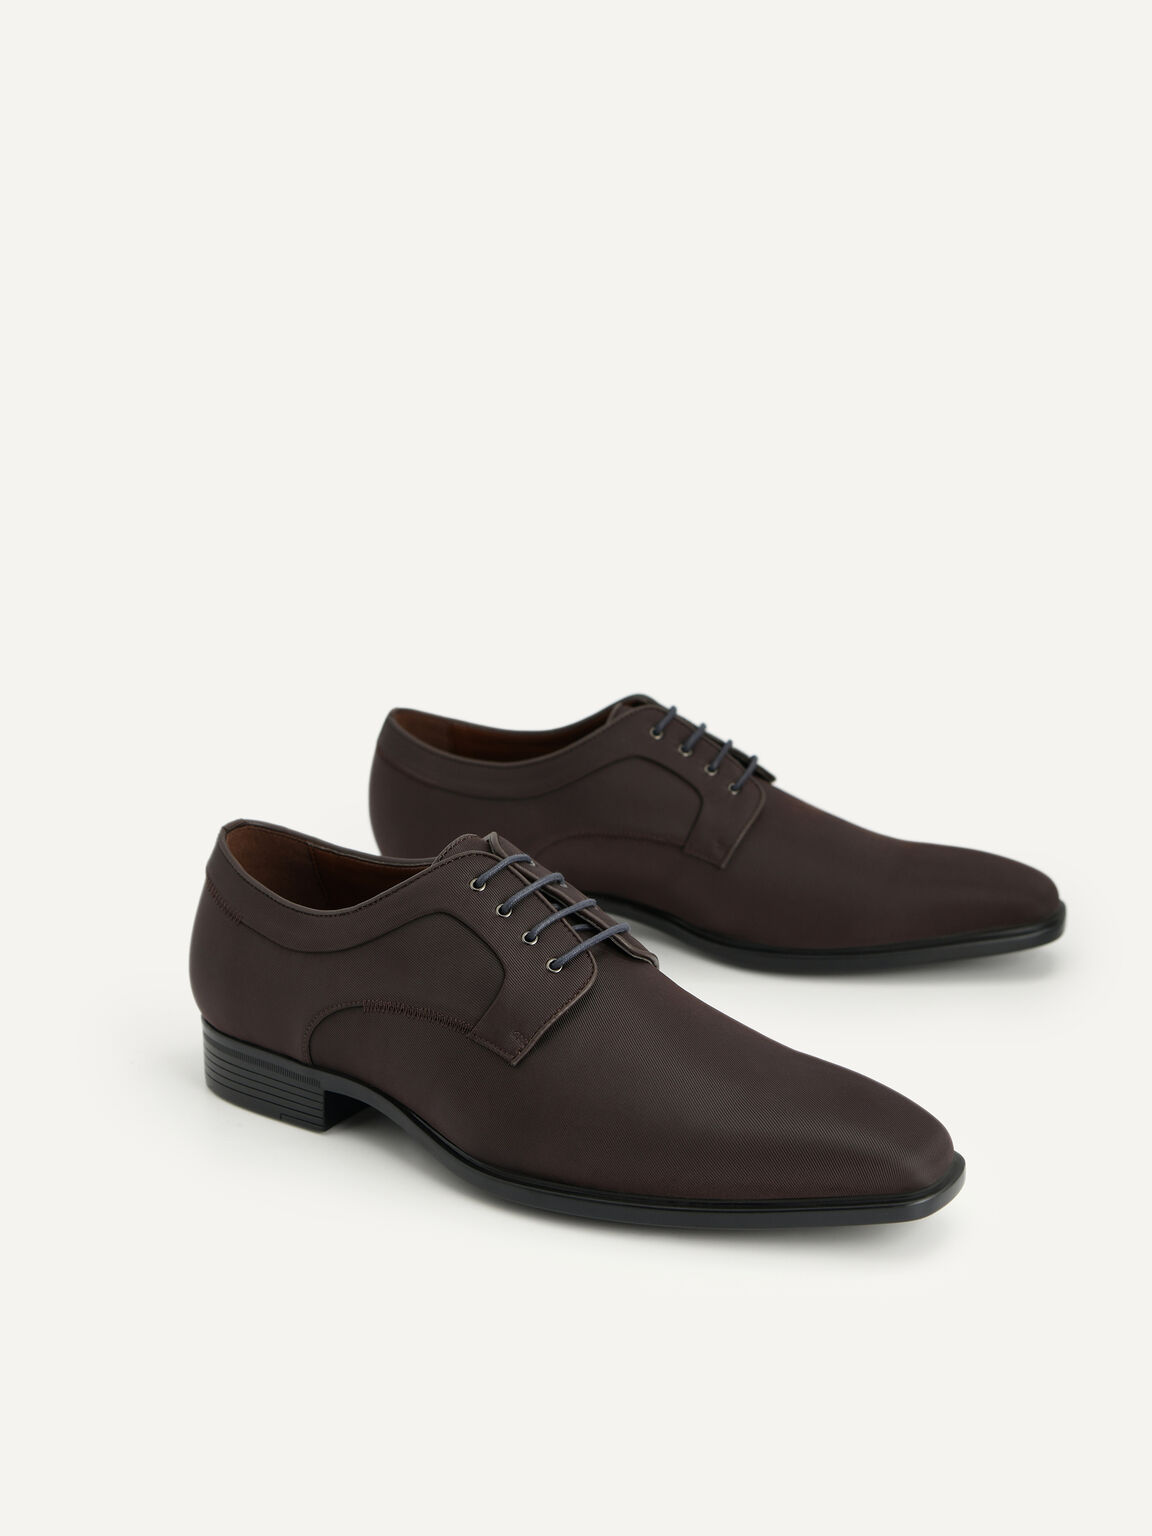 Pointed Square Toe Derby Shoes, Dark Brown